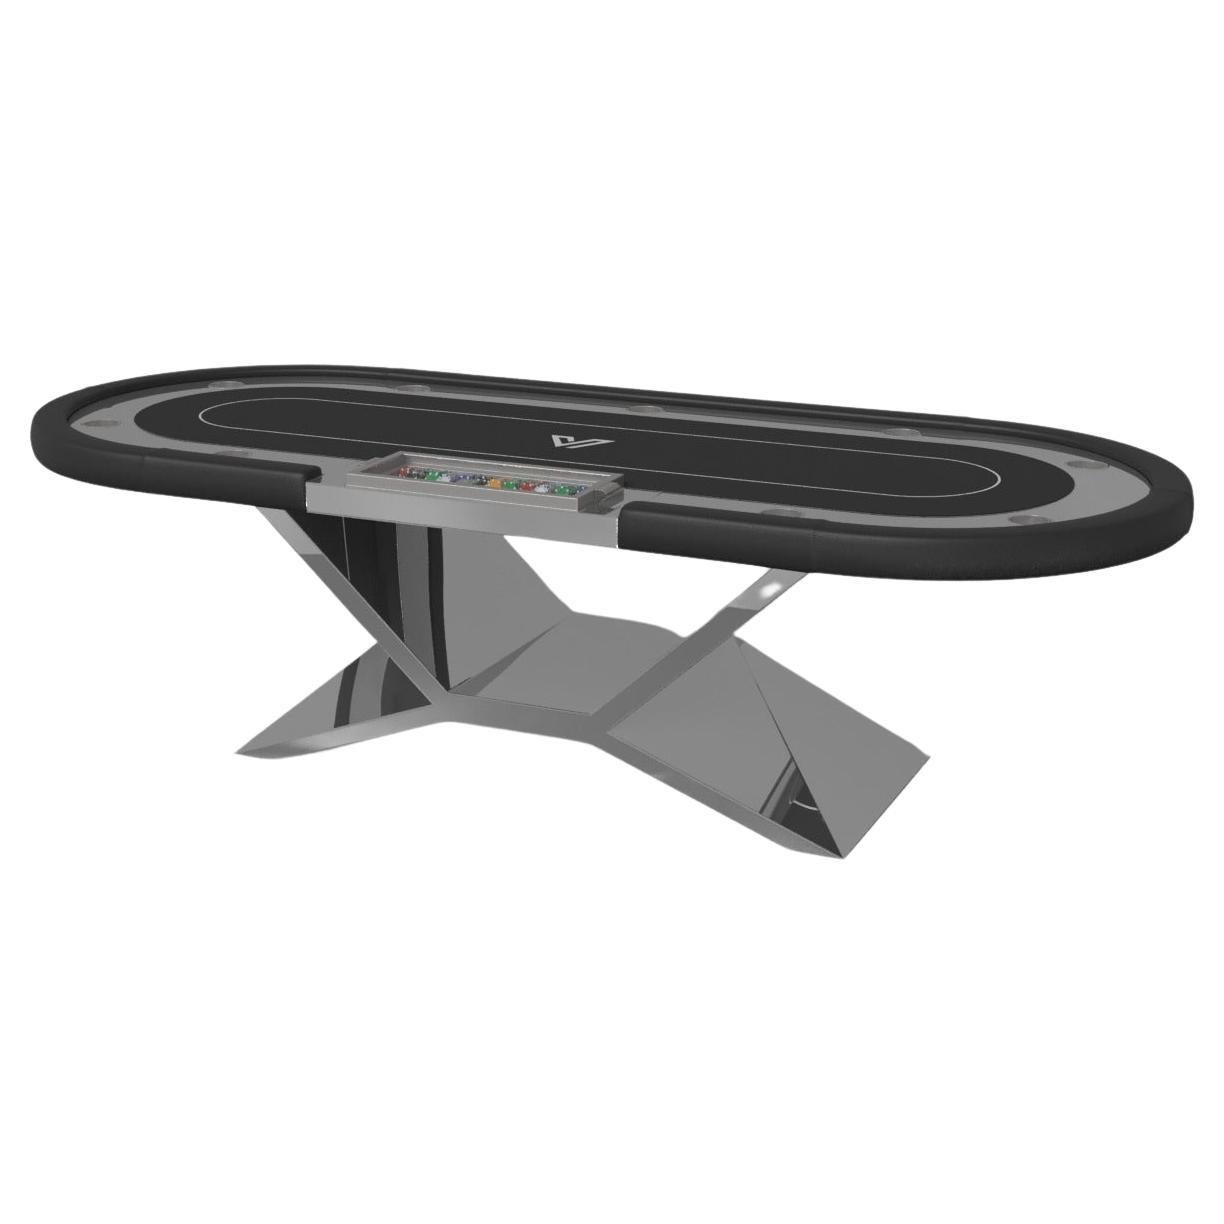 Elevate Customs Kors Poker Tables / Stainless Steel Sheet Metal in 8'8" - USA For Sale